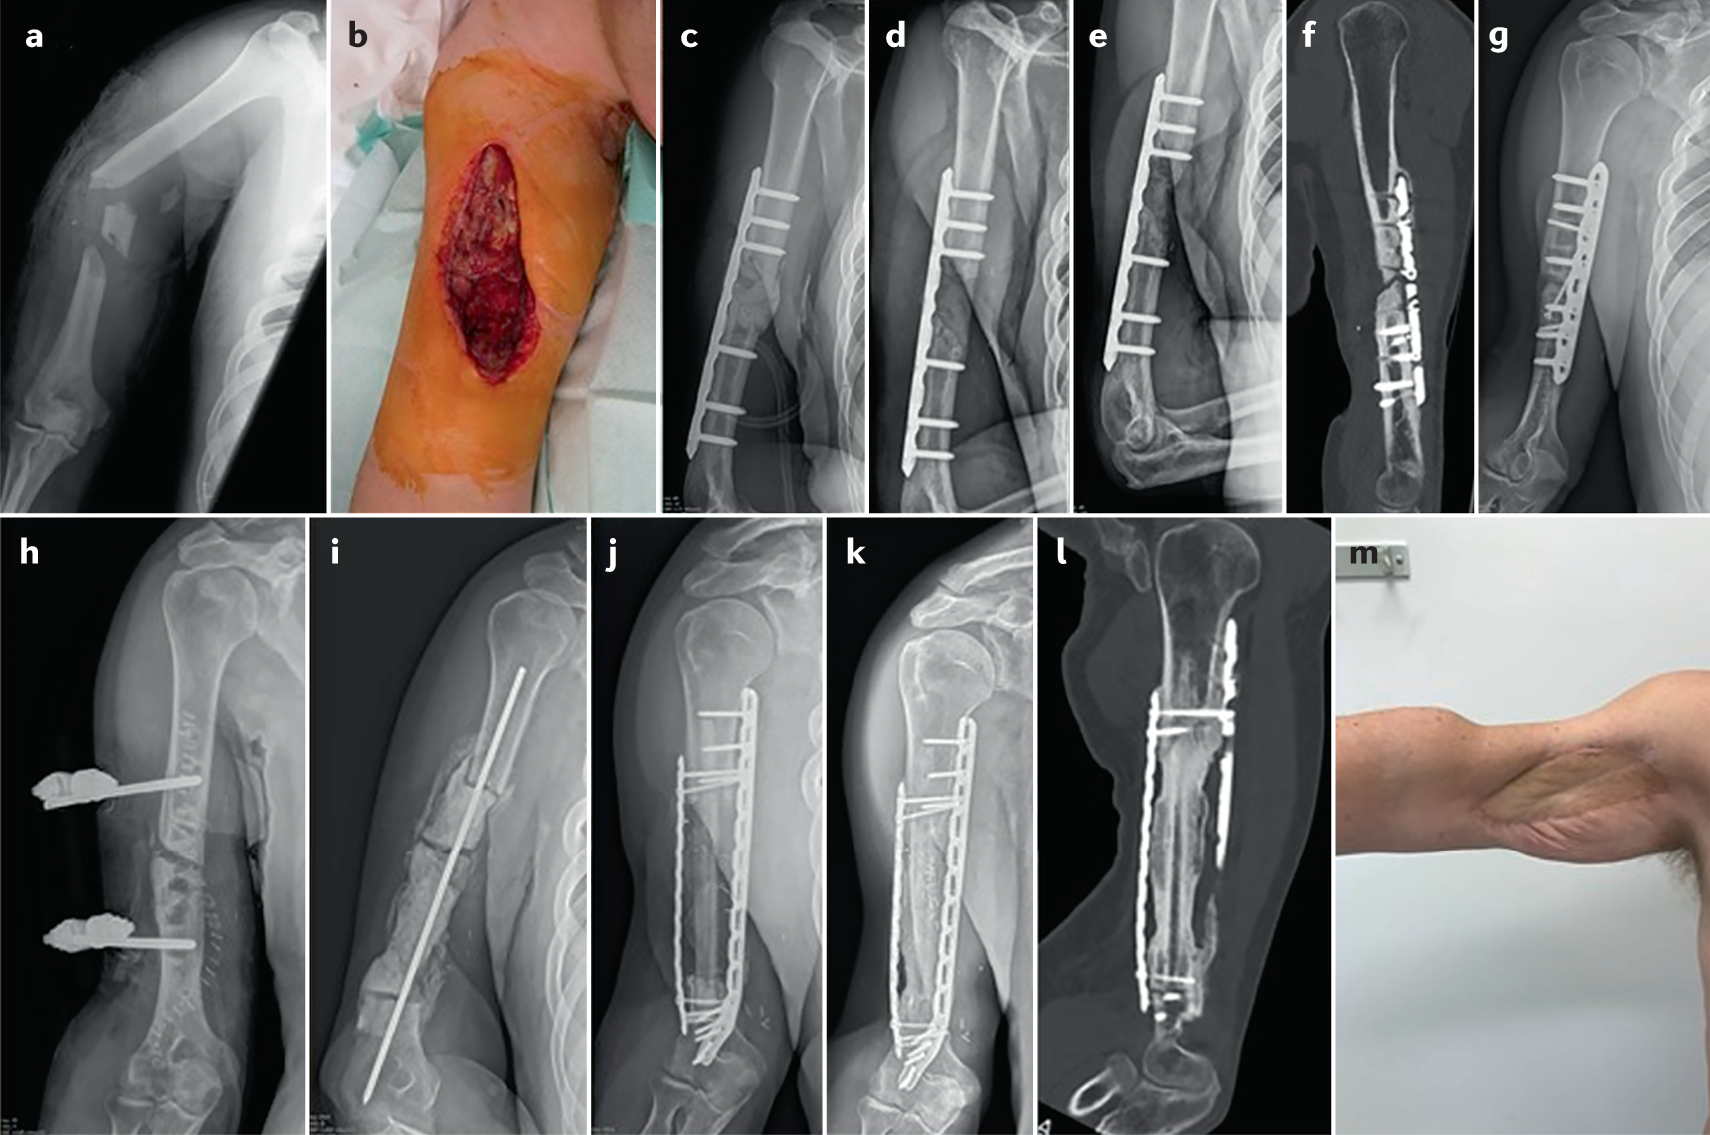 Fracture-Related Infection of the tibia due to a polymicrobial